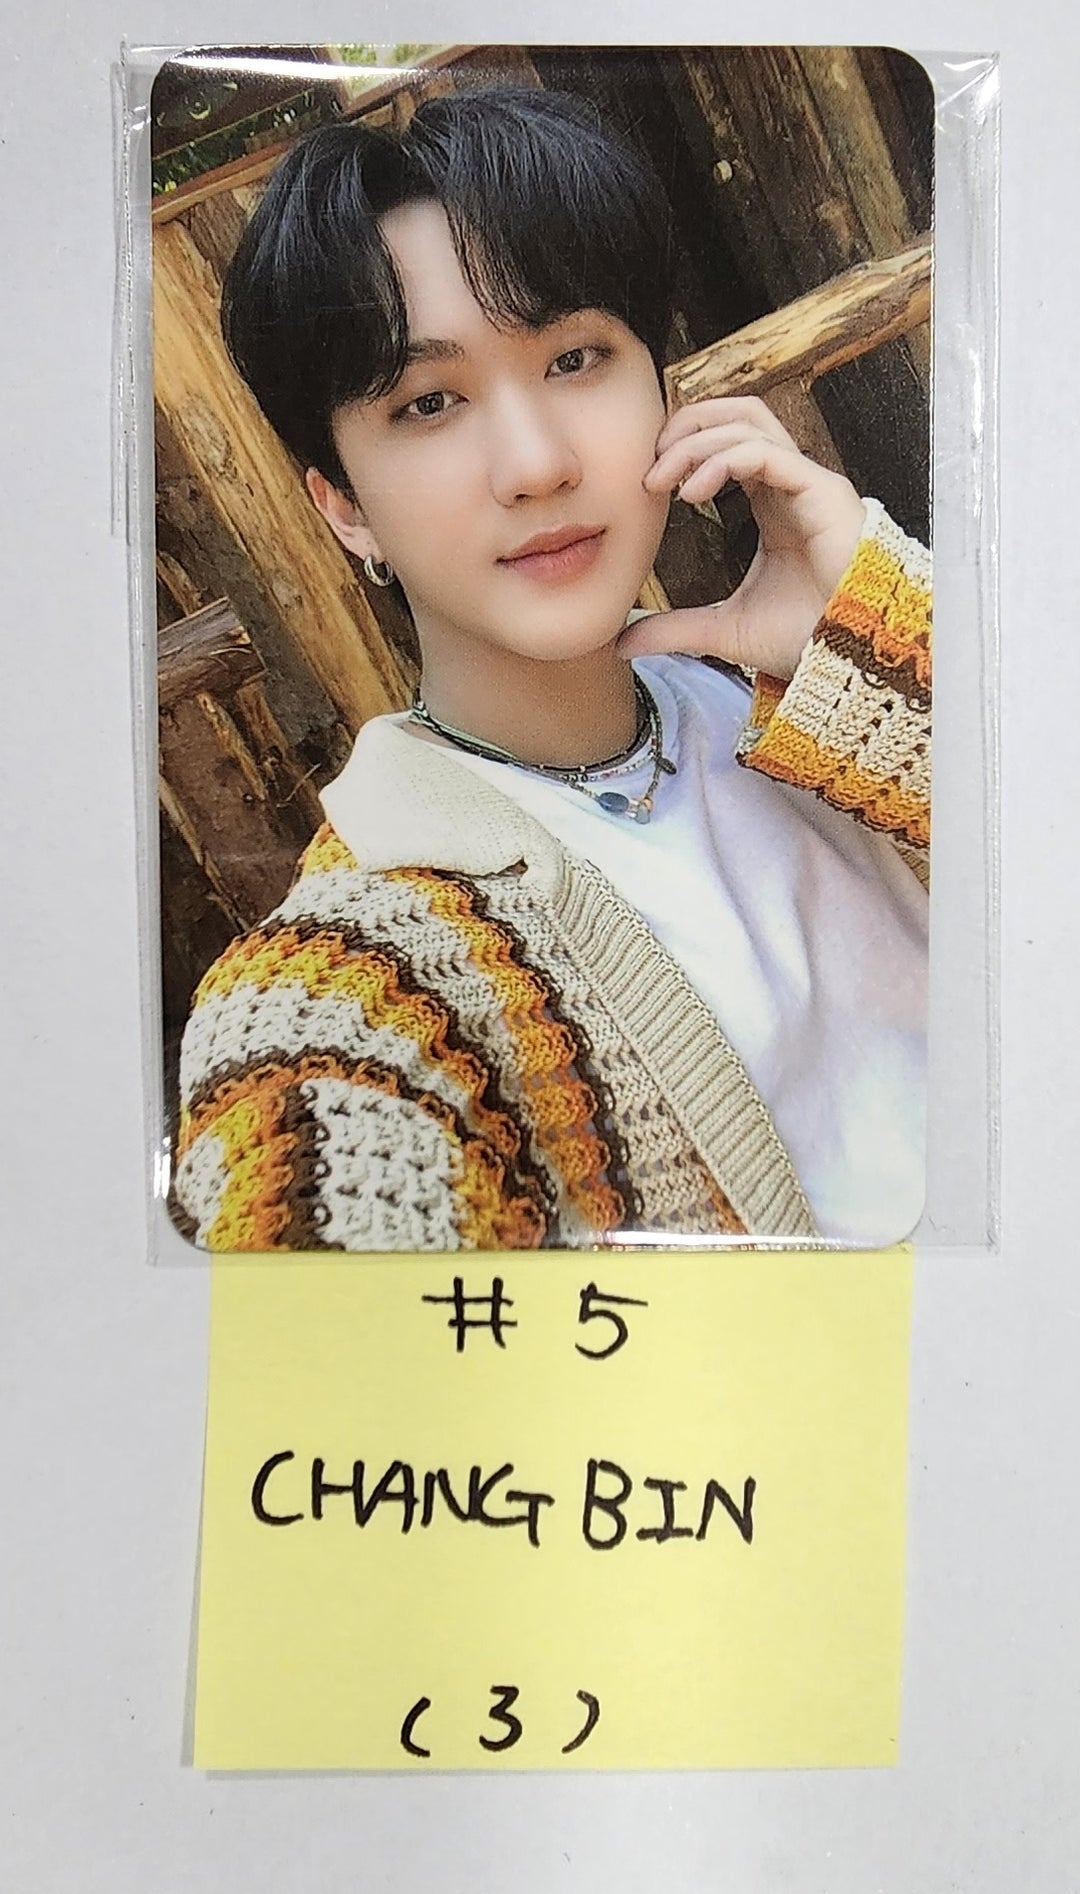 Stray Kids "Stay in STAY" in JEJU EXHIBITON - JYP Shop SKZ Official MD Event Photocard Round 2